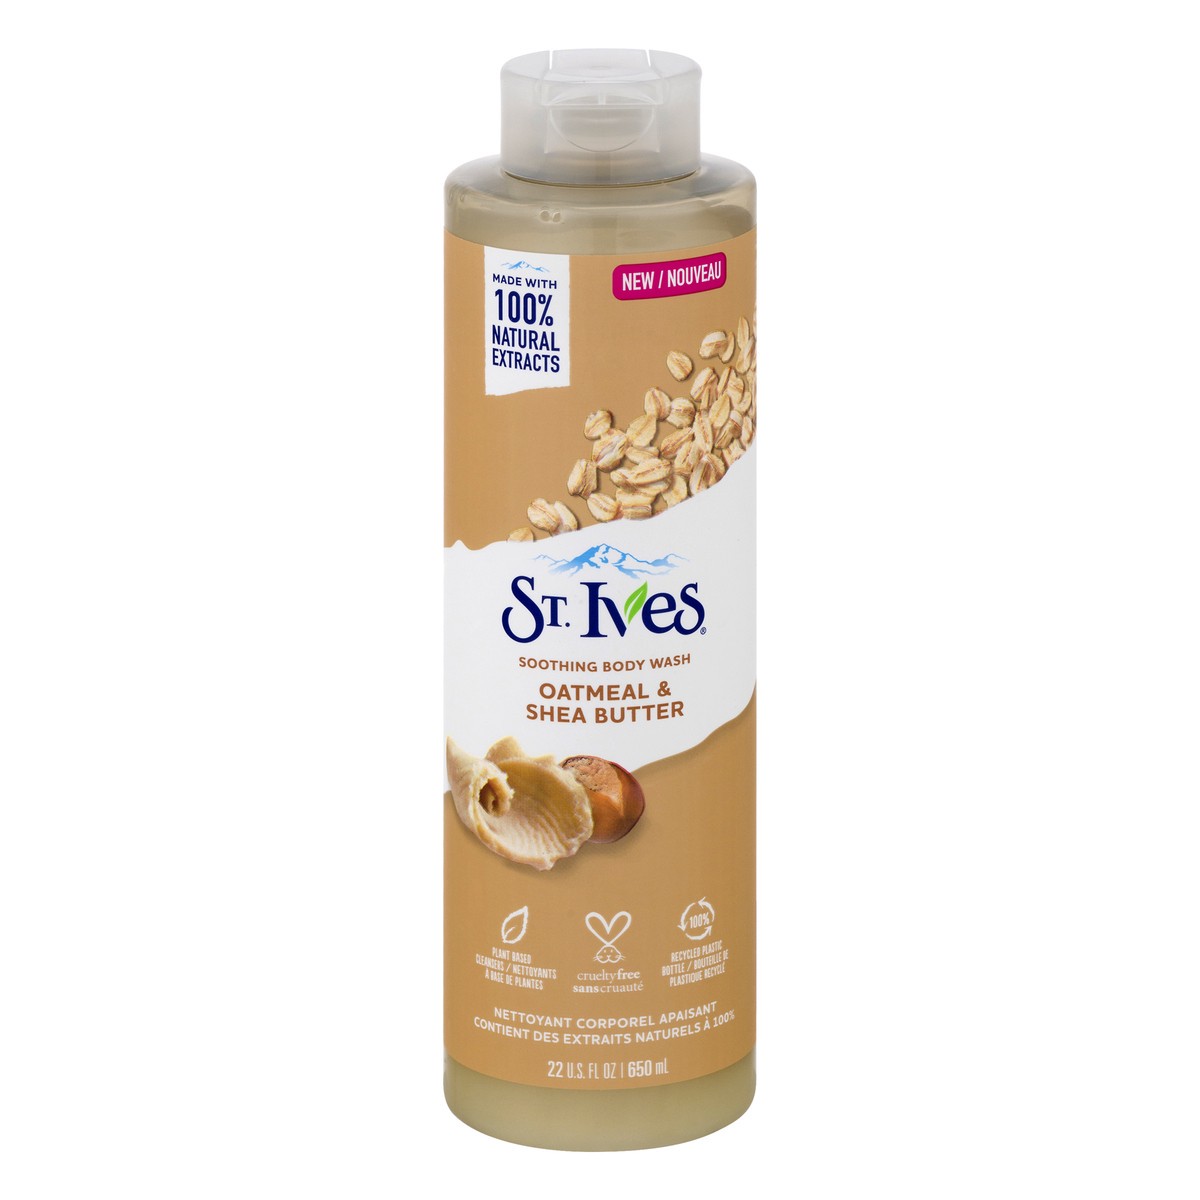 slide 1 of 103, St. Ives Soothing Body Wash Oatmeal & Shea Butter, 22 oz, 22 oz